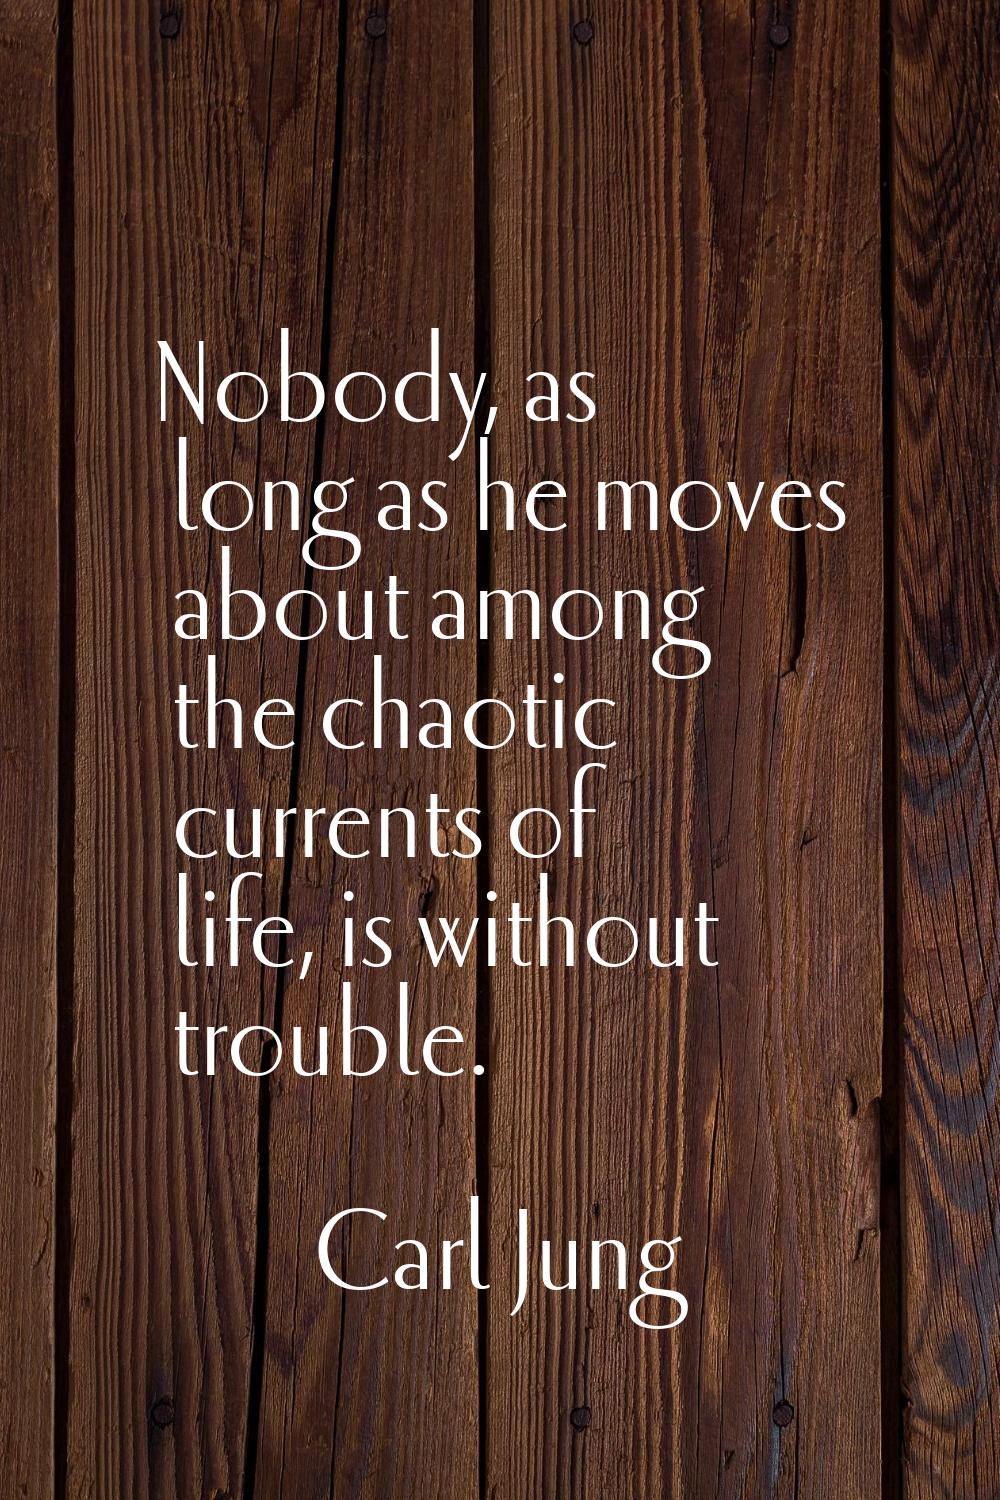 Nobody, as long as he moves about among the chaotic currents of life, is without trouble.